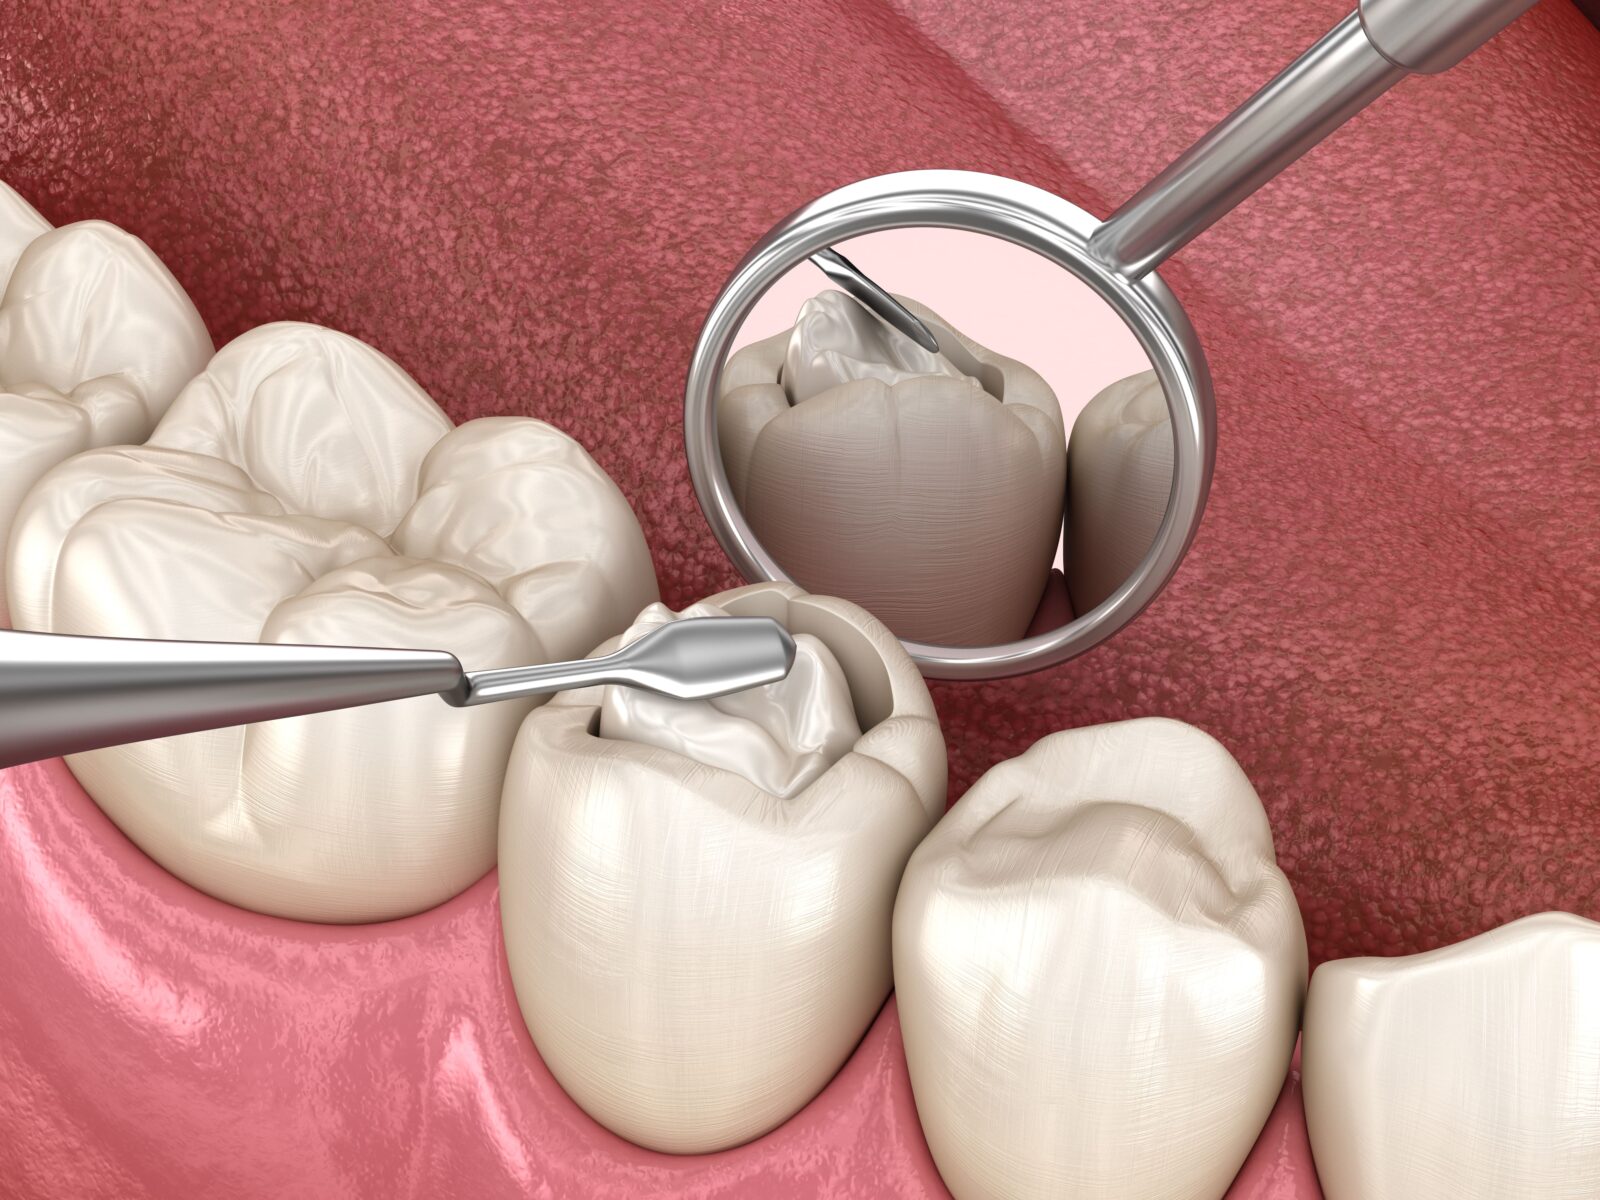 composite being placed in a dental cavity